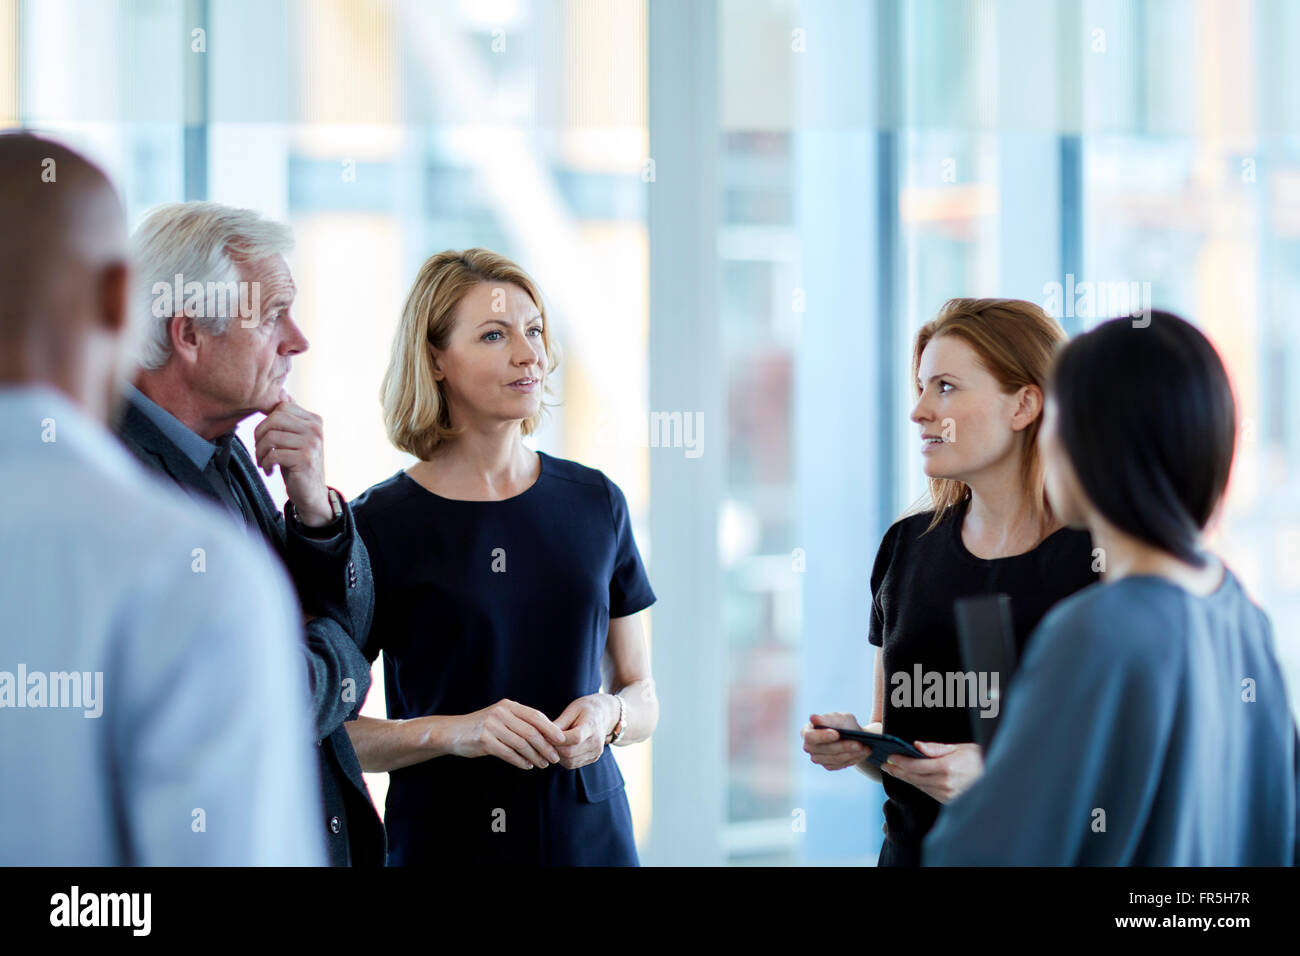 Business people talking in lobby Banque D'Images